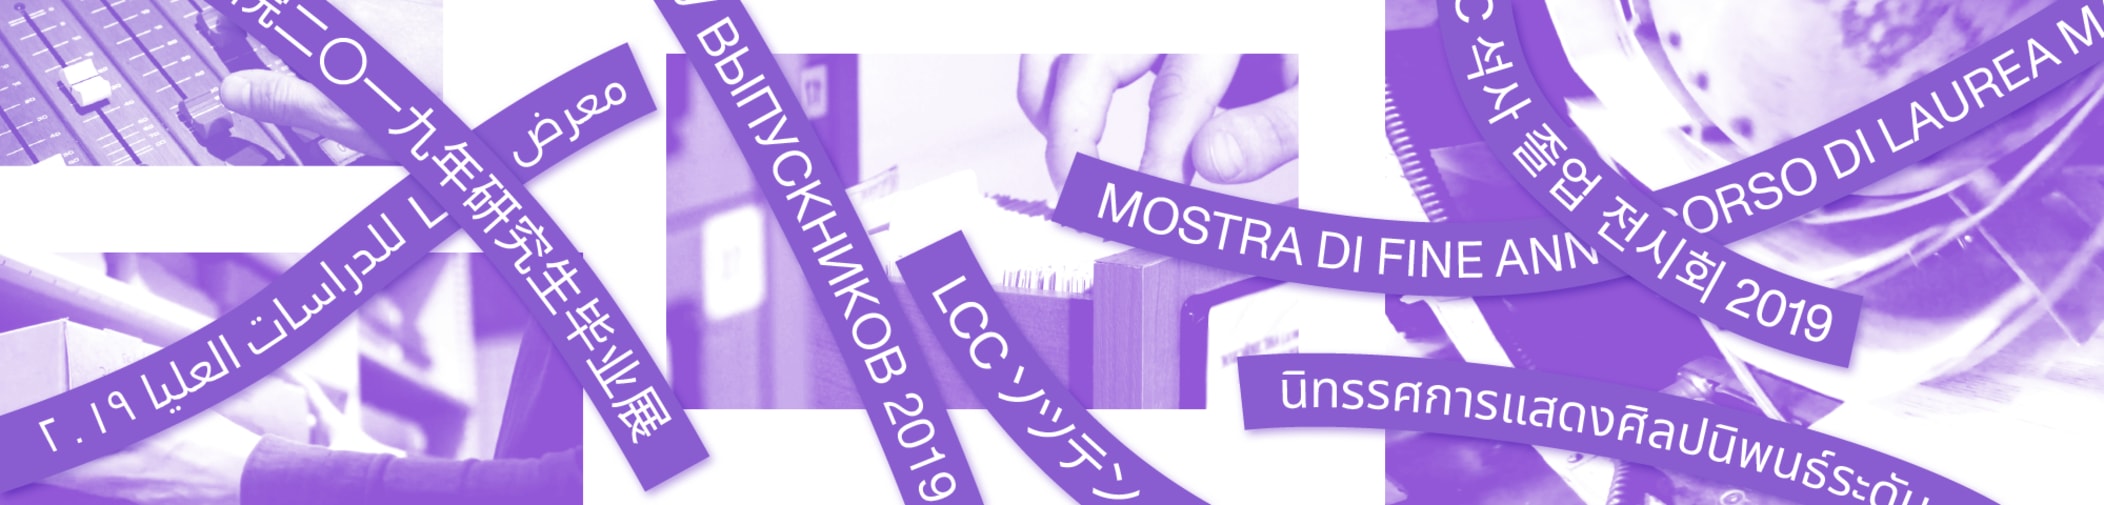 Purple banner shapes with white text written in multiple languages.